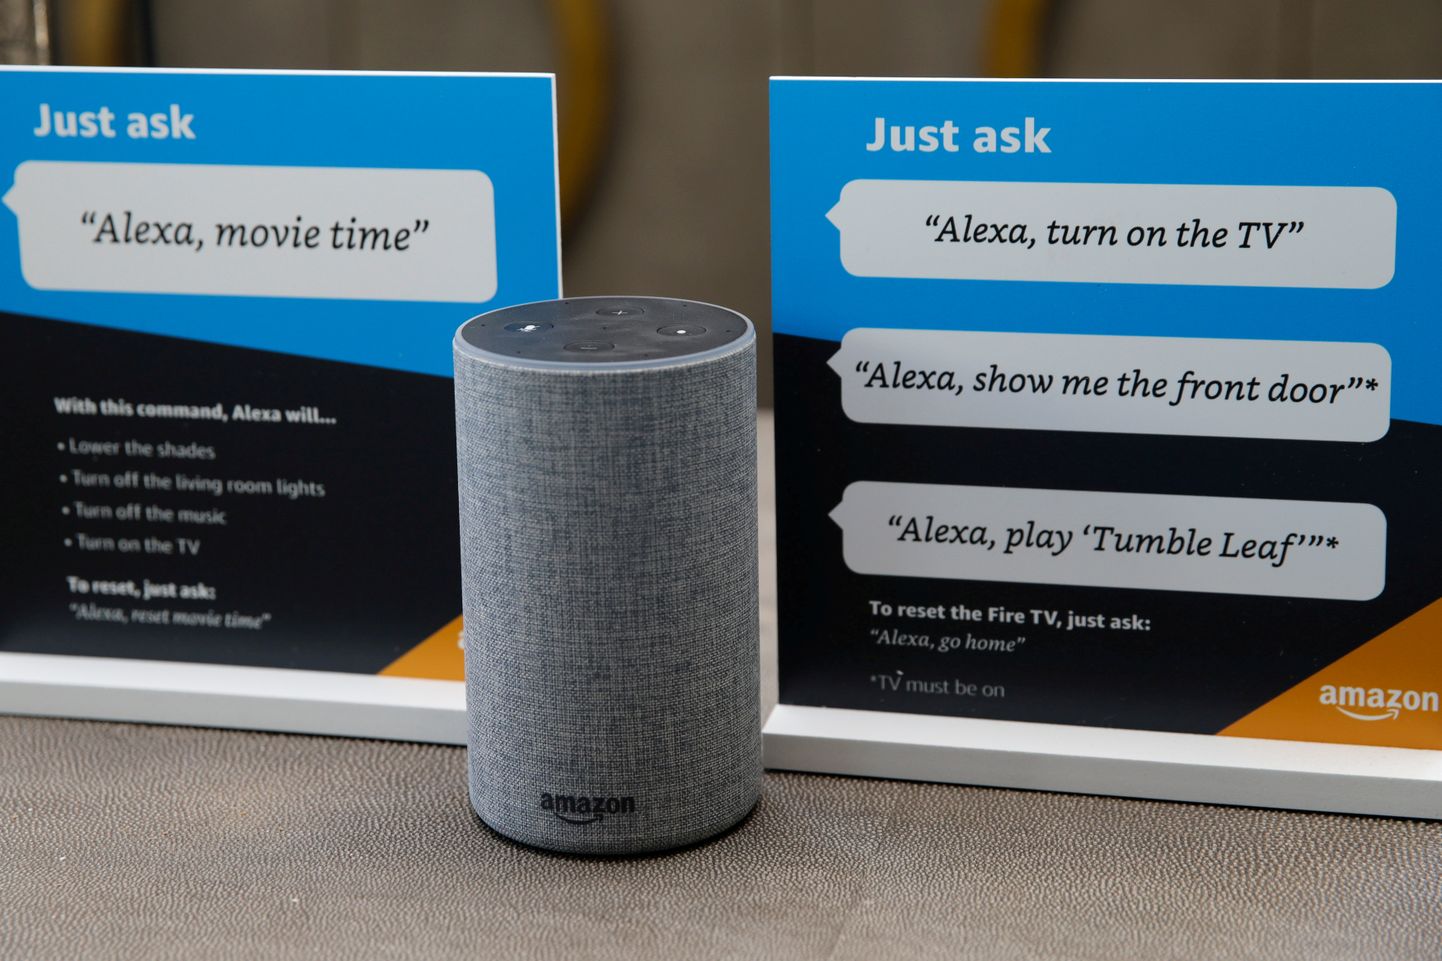 FILE PHOTO: Prompts on how to use Amazon's Alexa personal assistant are seen in an Amazon ‘experience centre’ in Vallejo, California, U.S., May 8, 2018. REUTERS/Elijah Nouvelage/File Photo